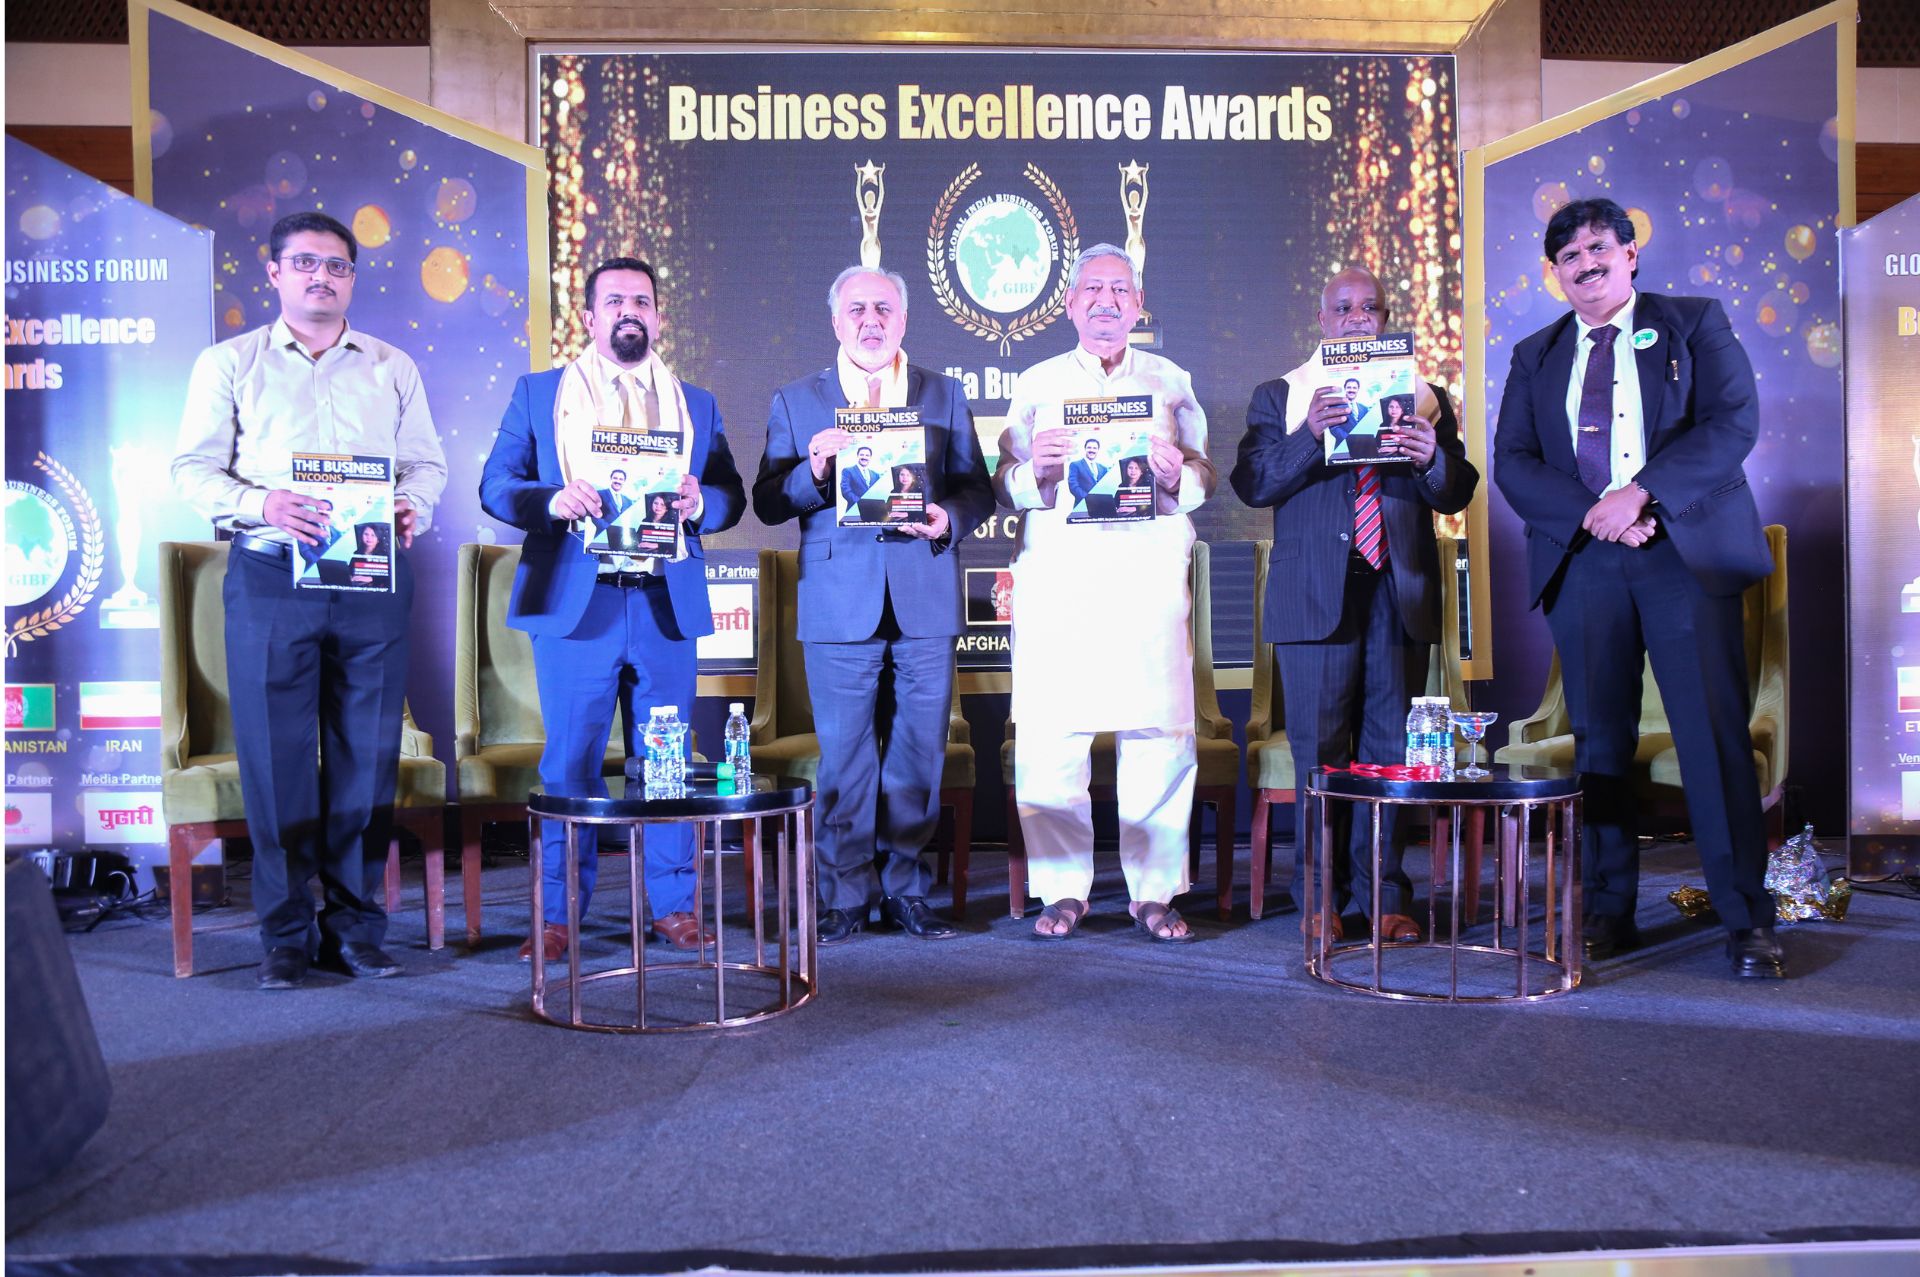 Inauguration of The Business Tycoons Magazine in The Extraordinary Business Leaders